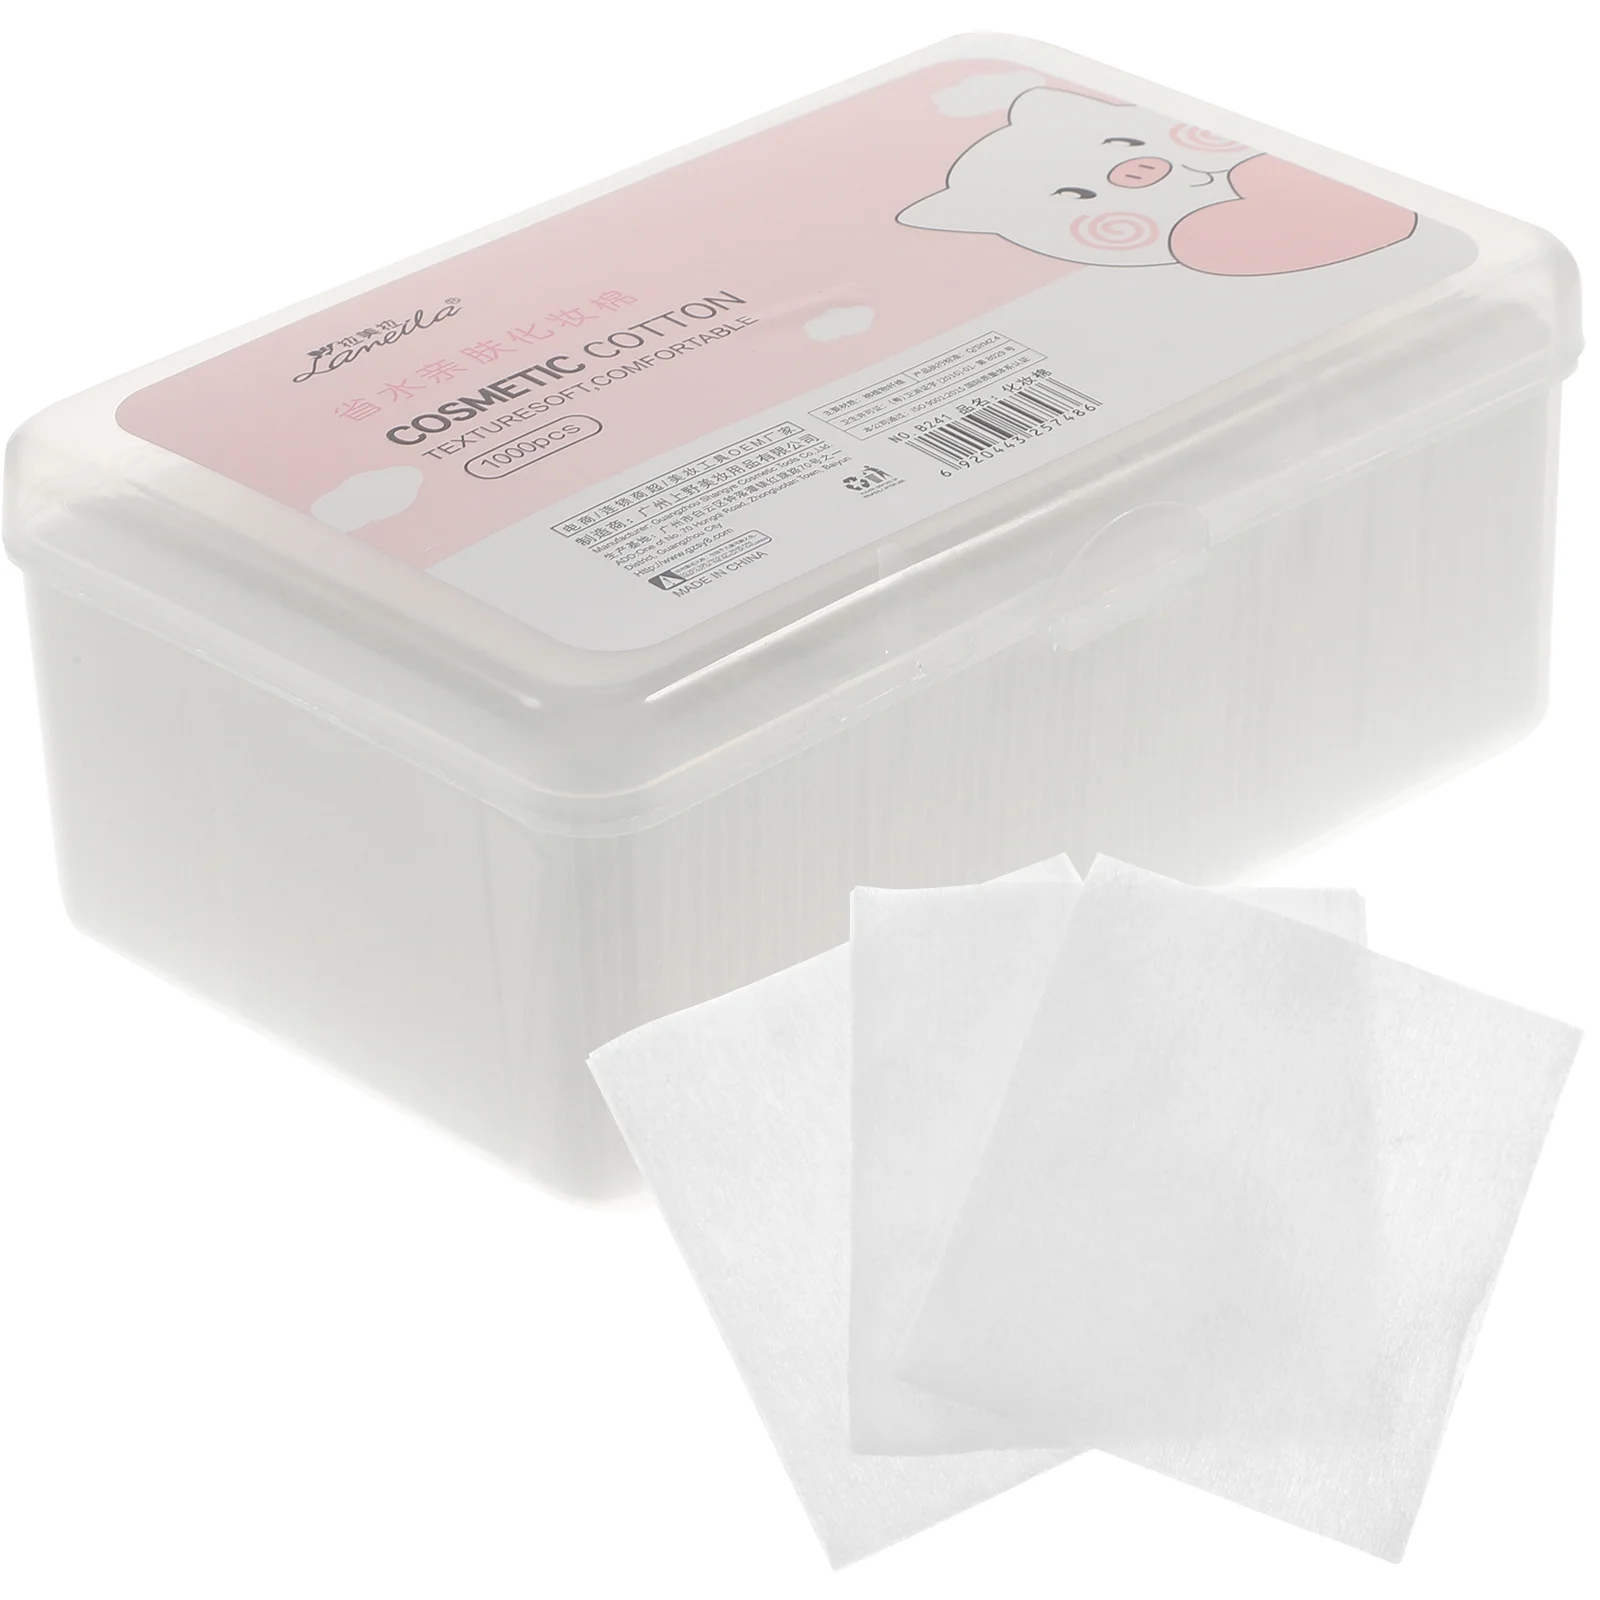 

1000pcs Makeup Cotton Pads Cotton Gauze Wipe Cleaning Pad for Makeup Removal Wound Aid ( White )